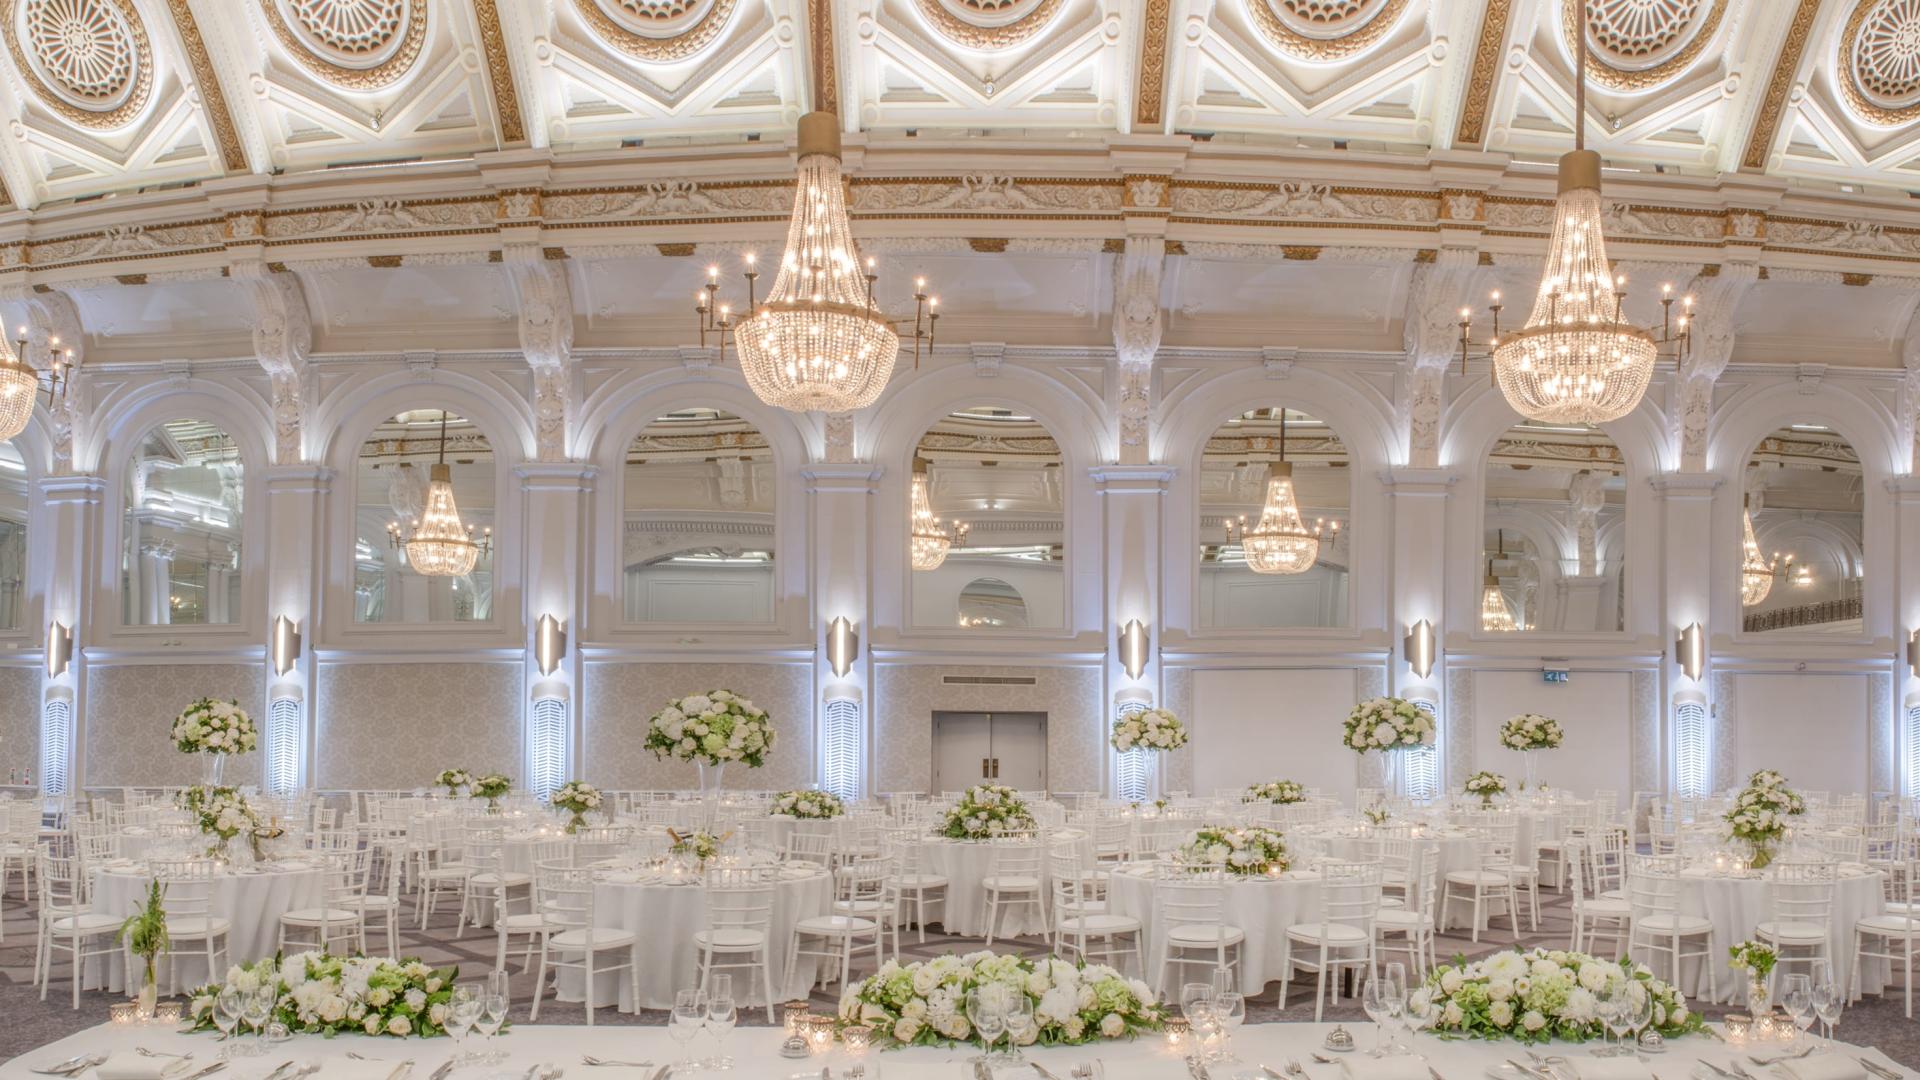 Banquet Halls for Hire in London